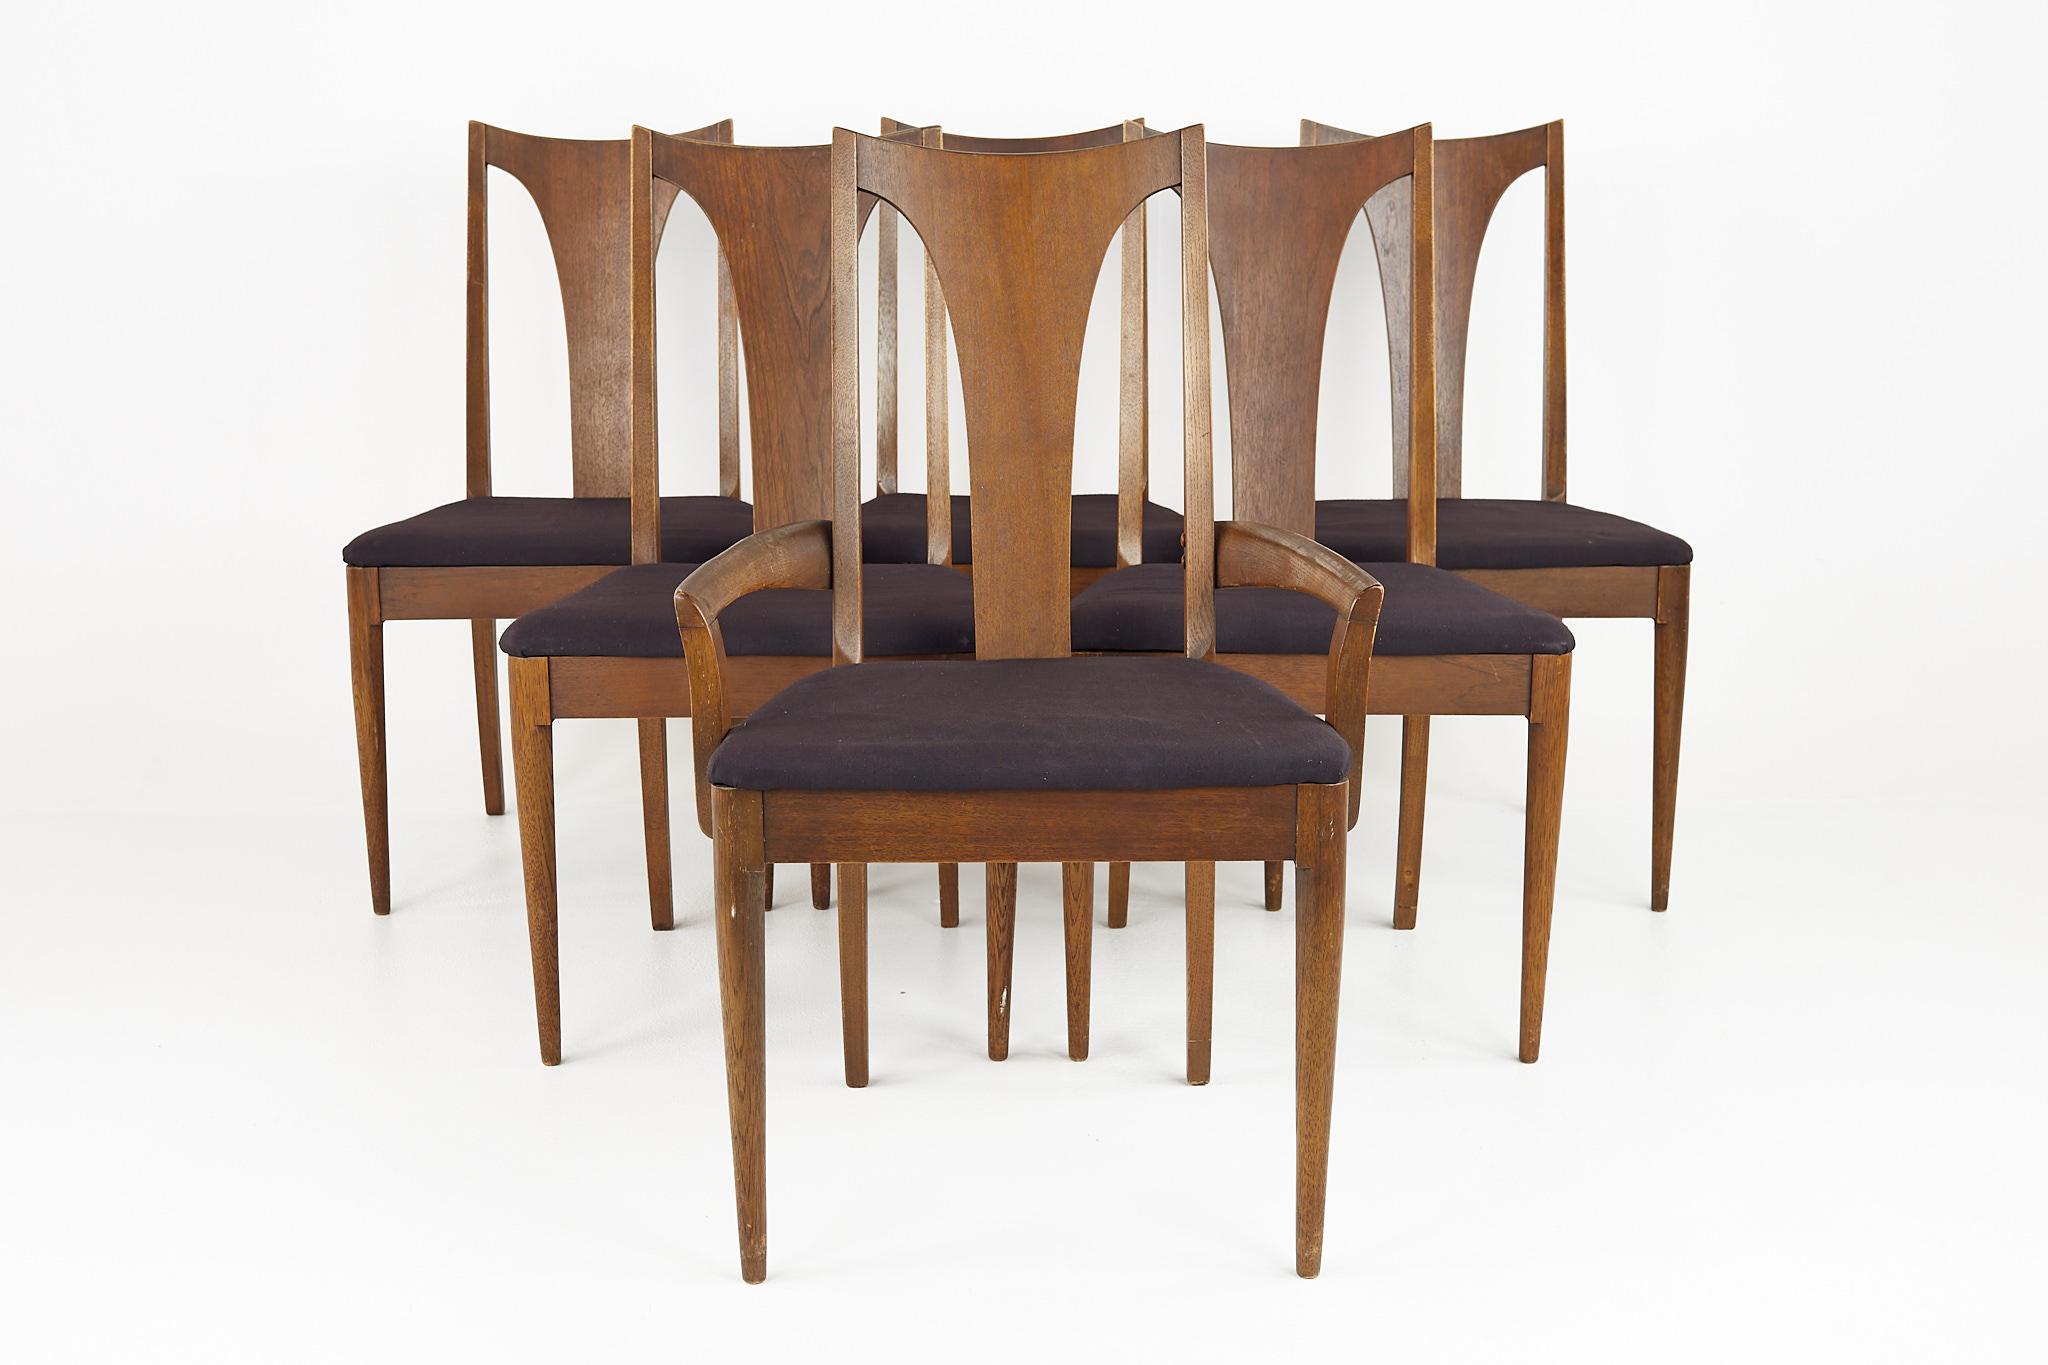 Broyhill Brasilia mid century walnut dining chairs - set of 6

These chairs measure: 22.75 wide x 20.5 deep x 37 inches high, with a seat height of 17.75 and arm height of 22.5 inches

?All pieces of furniture can be had in what we call restored